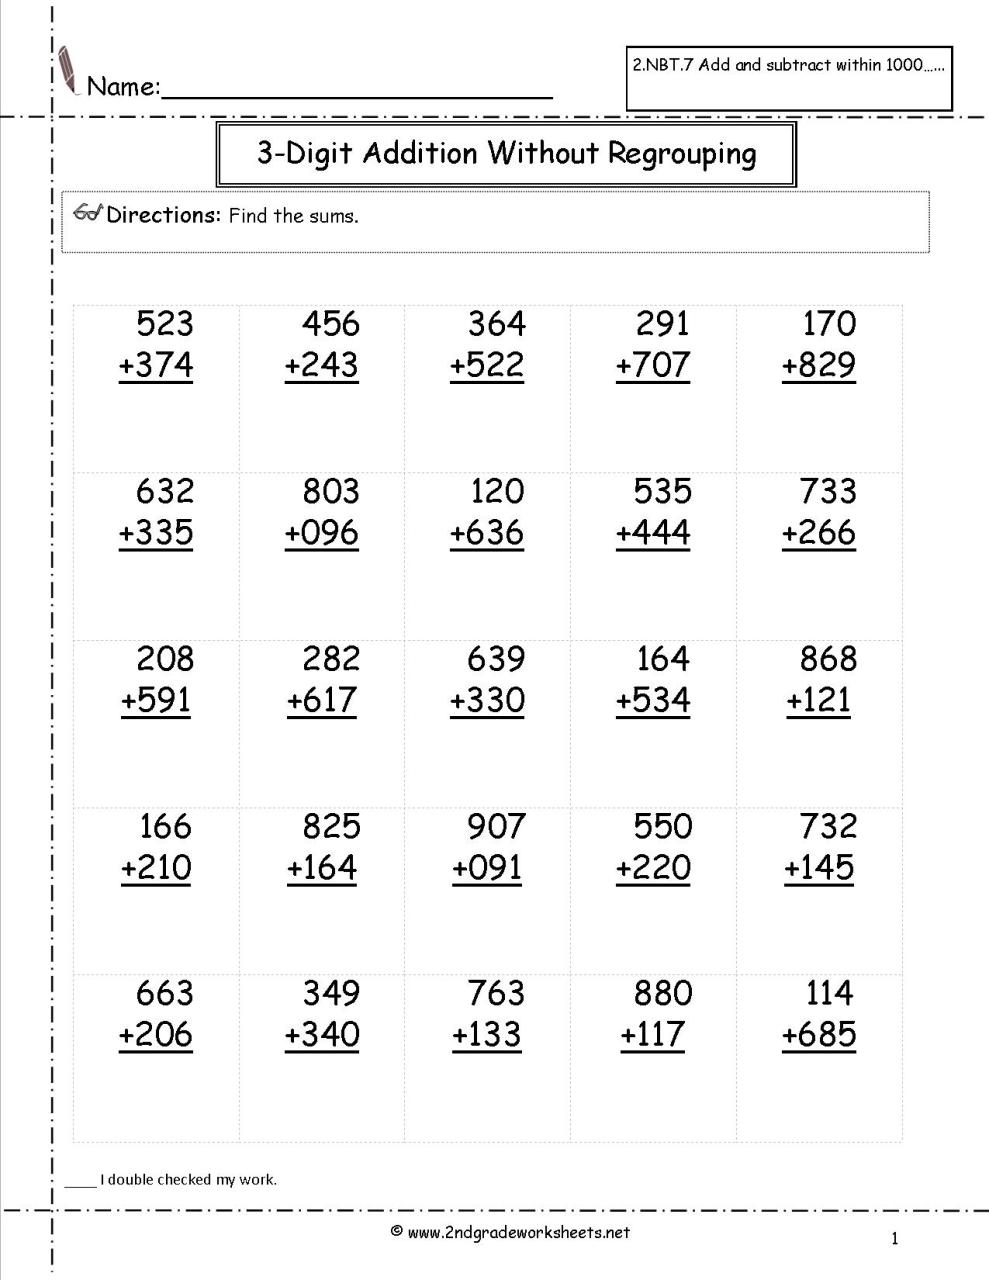 Free Addition And Subtraction Worksheets For 2Nd Grade